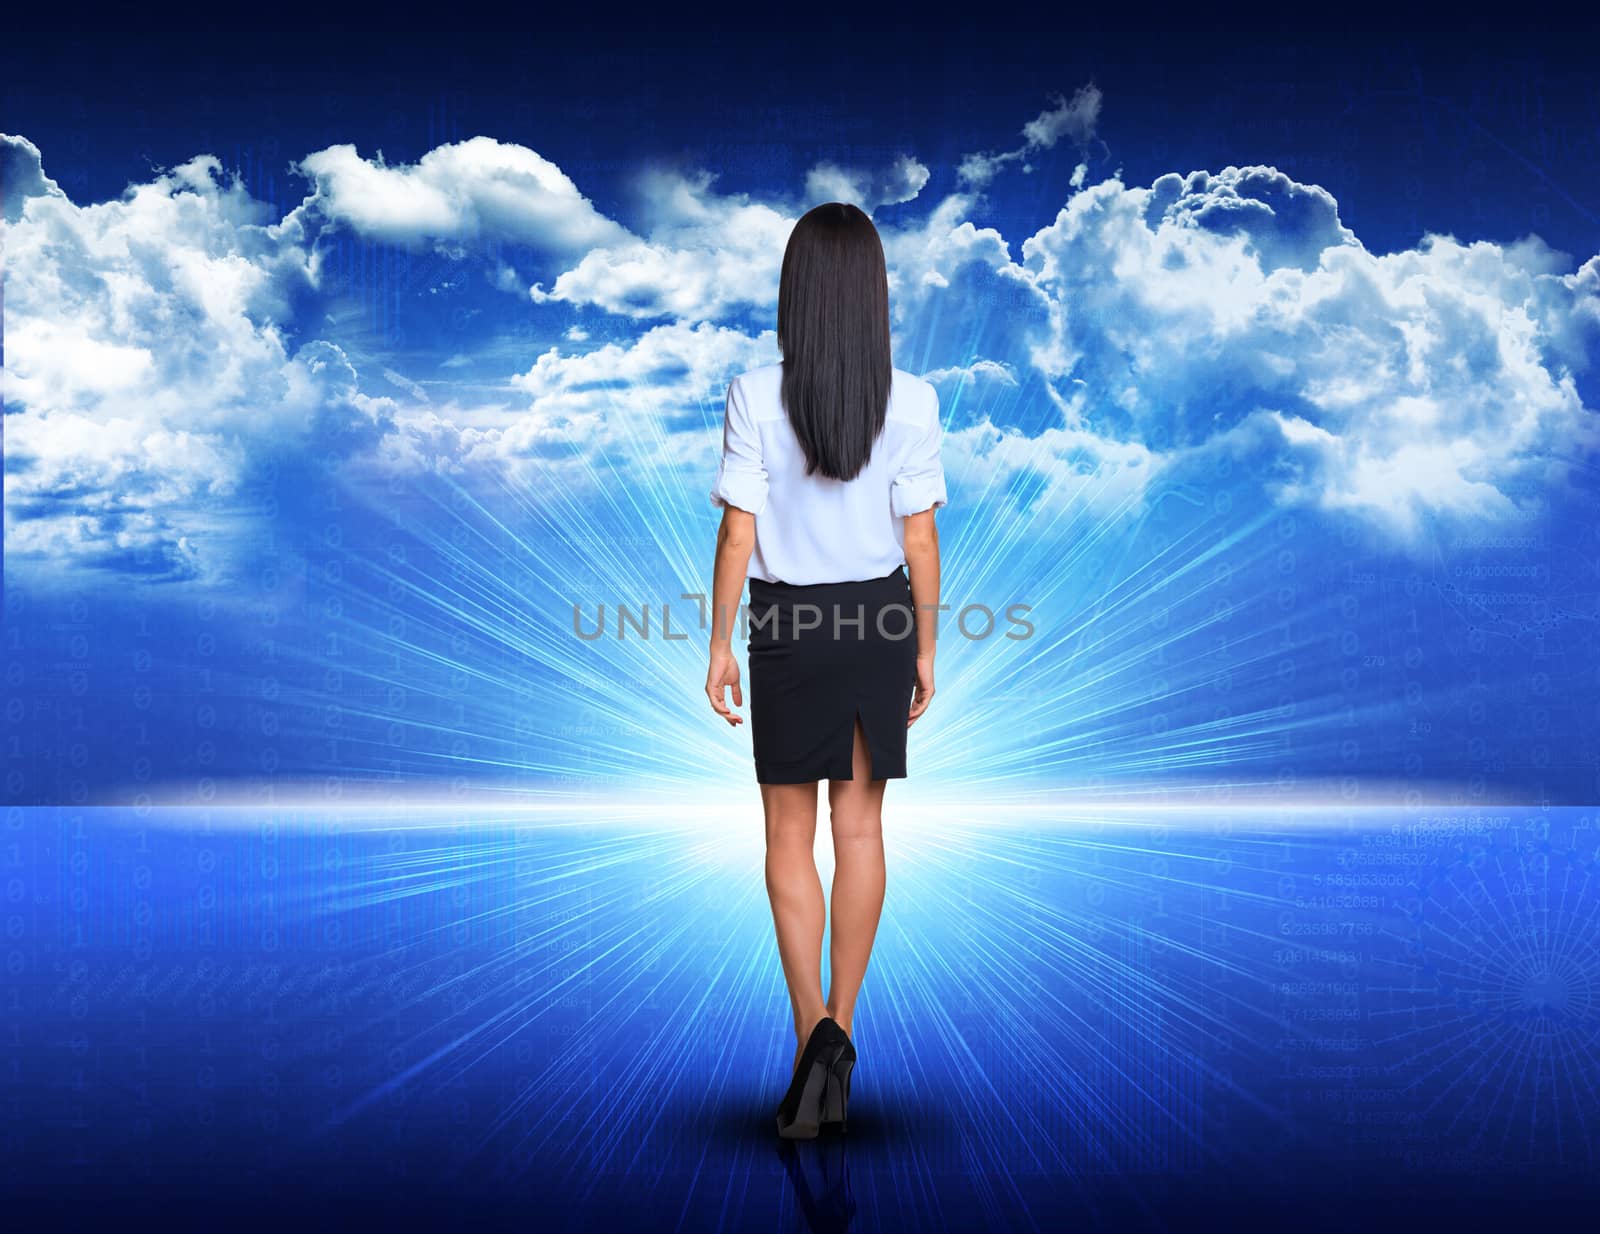 Businesswoman walking against digitally generated spacy blue landscape with rising sun and cloudy sky